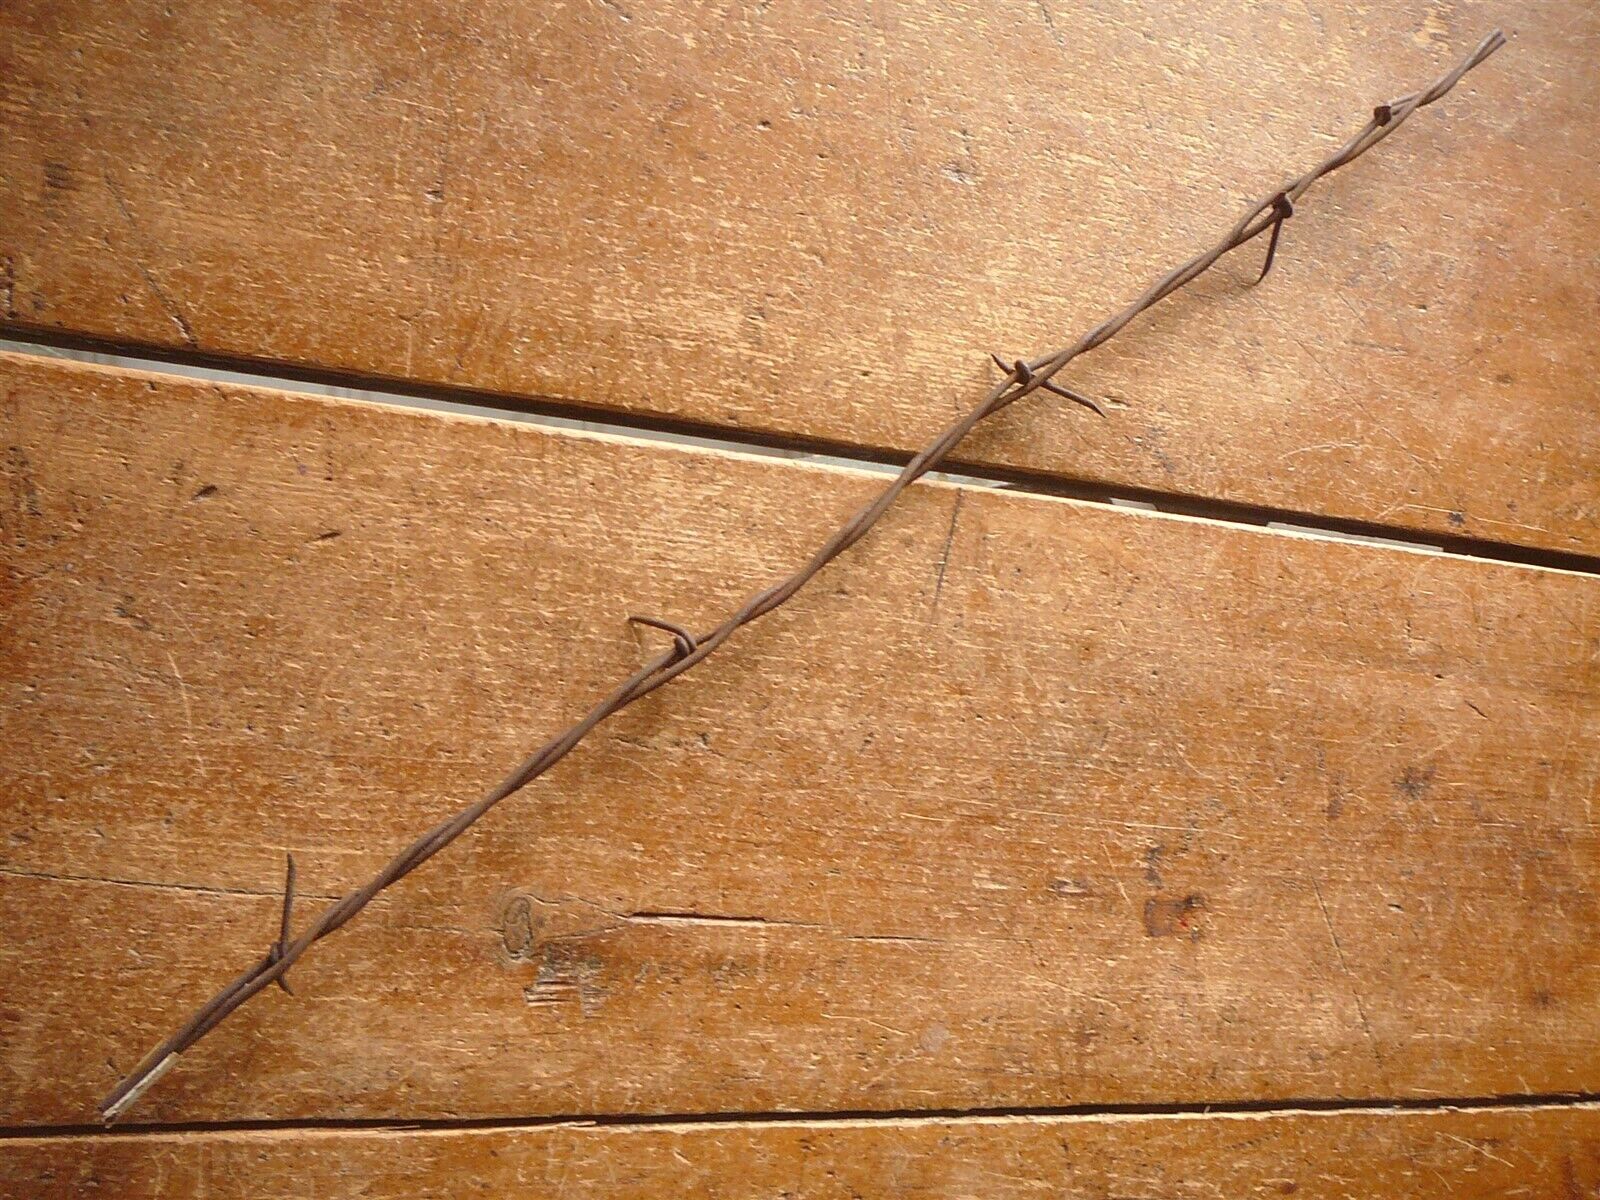 MILES STAPLE on 1 of 2 - EXTRA LONG & VERY SHORT POINTS - ANTIQUE BARBED WIRE 